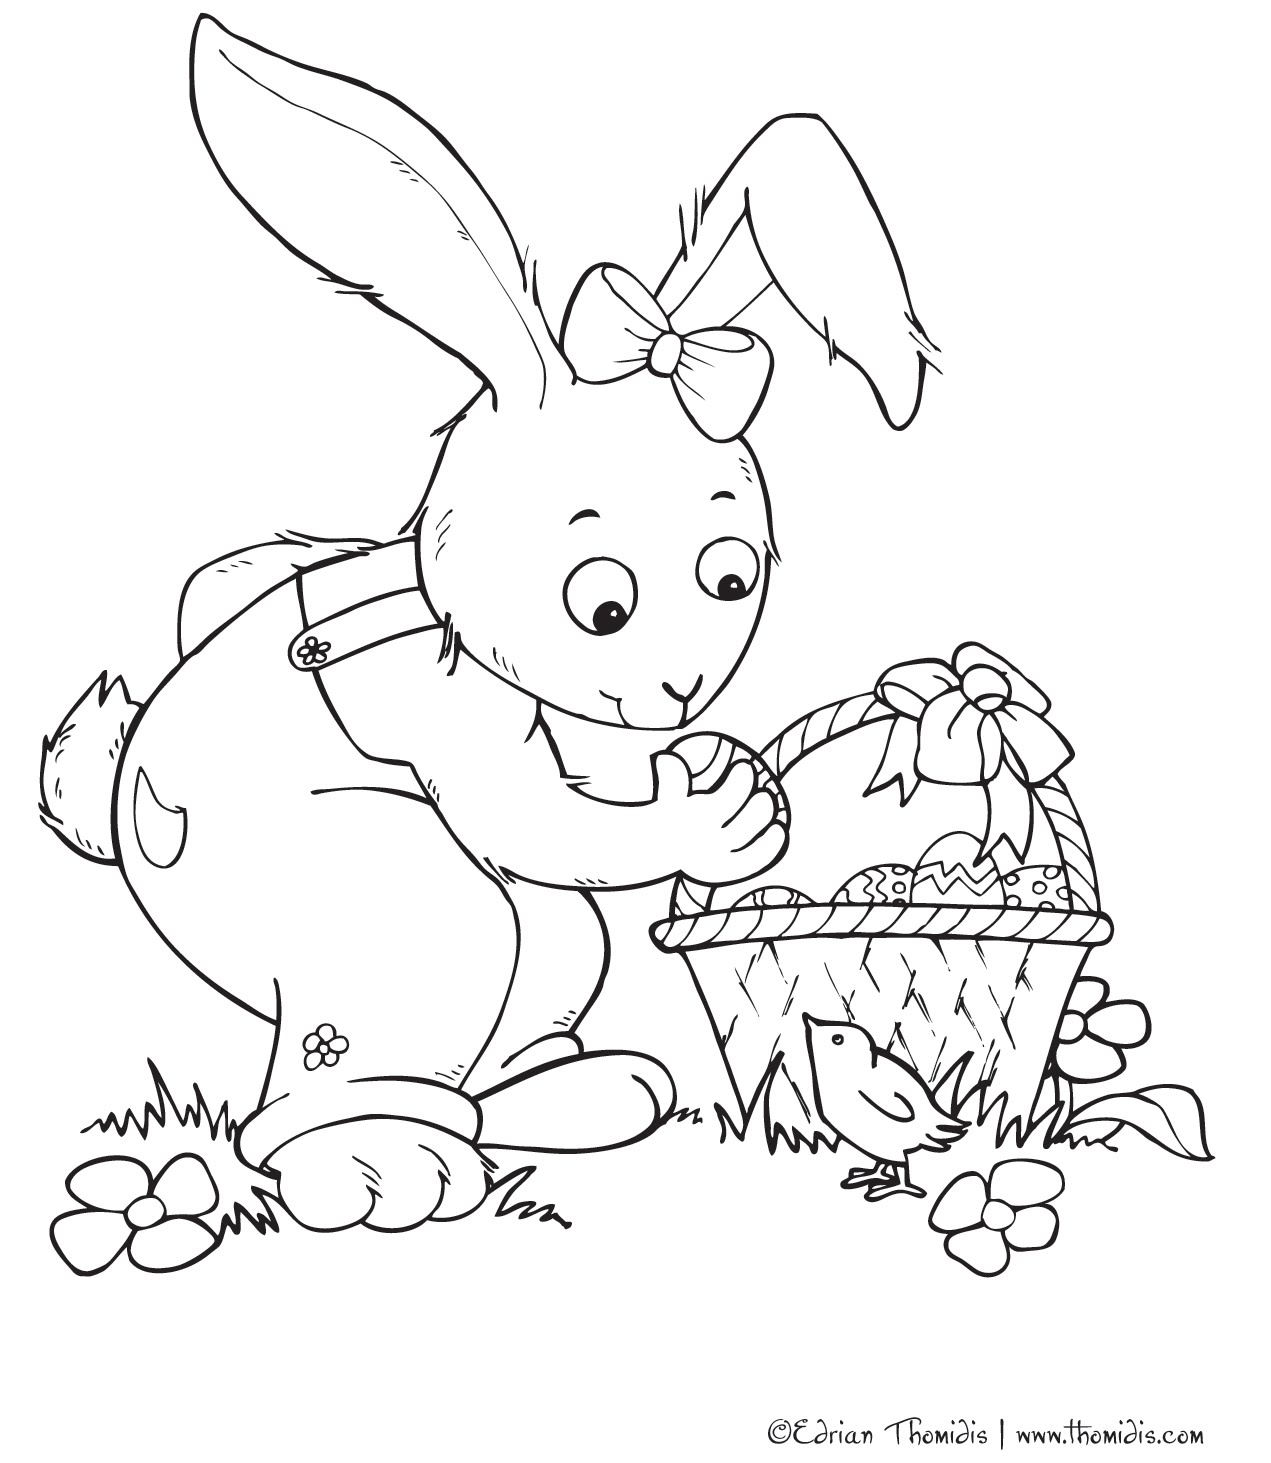 Download A picture paints a thousand words: EASTER COLORING PAGE